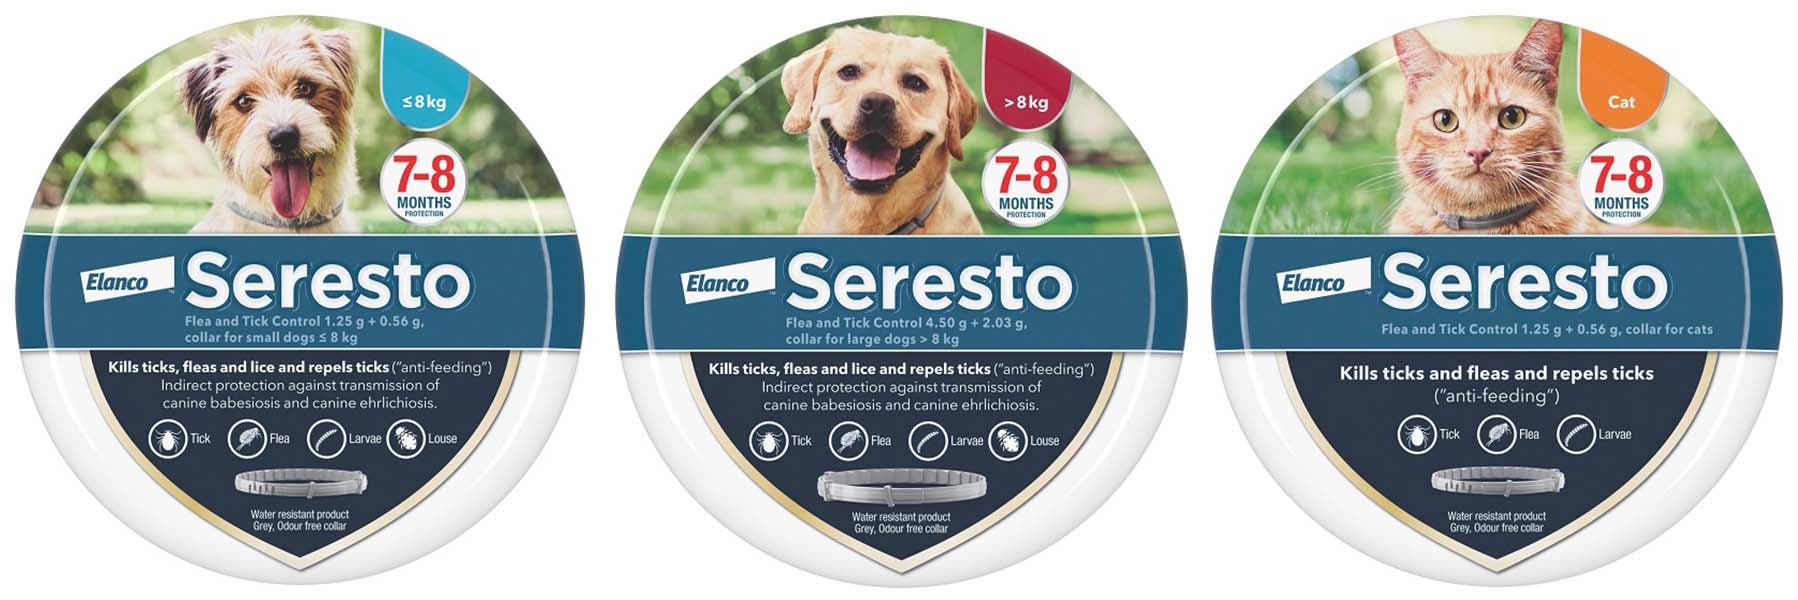 Pack shot of Seresto flea and tick control collars for dogs and cats